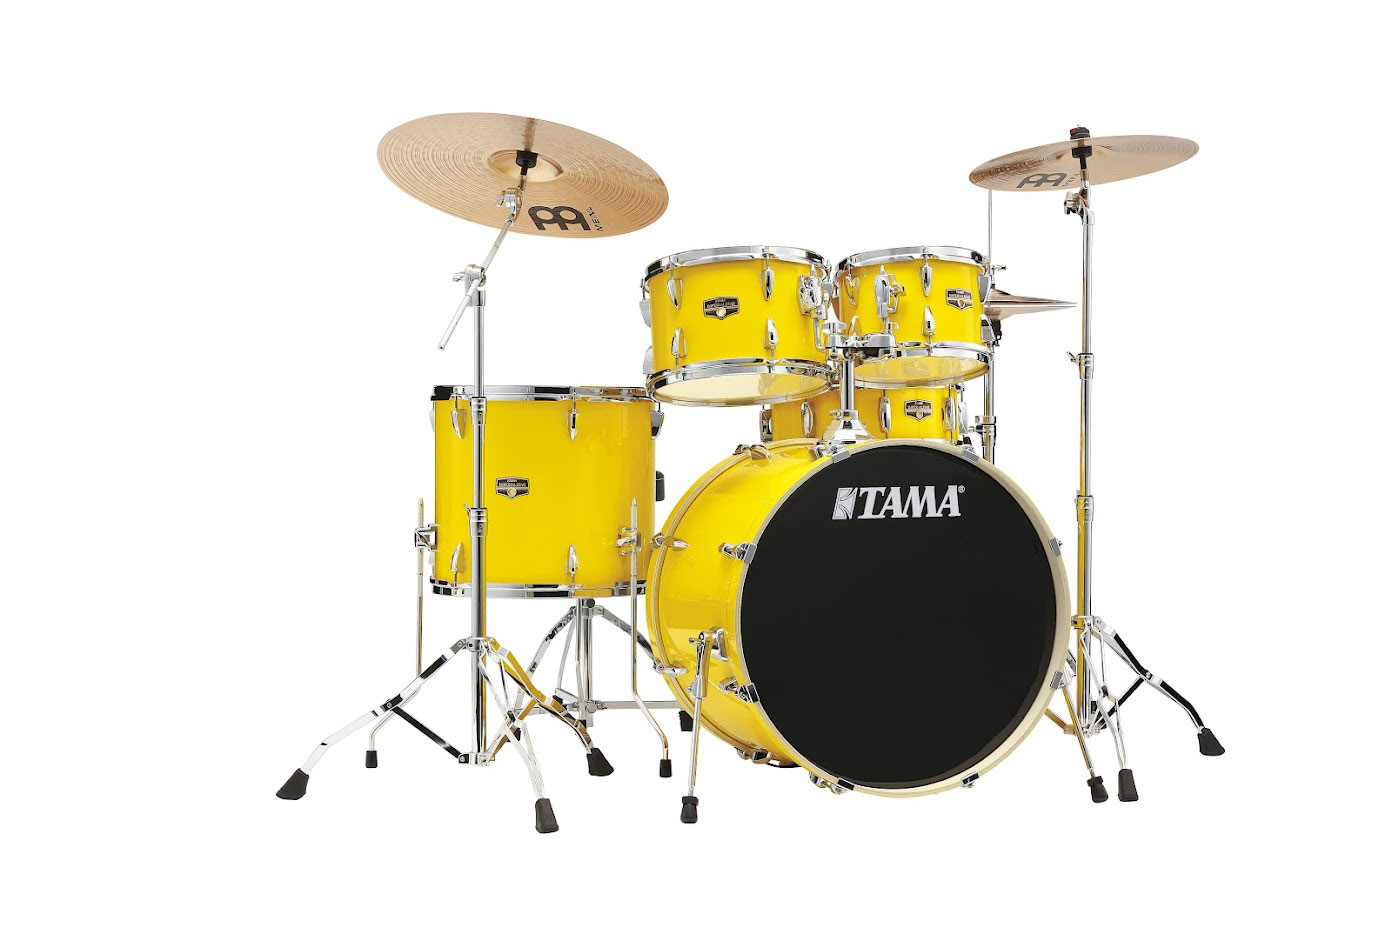 TAMA IMPERIALSTAR STAGE 22 DRUM KIT ELECTRIC YELLOW